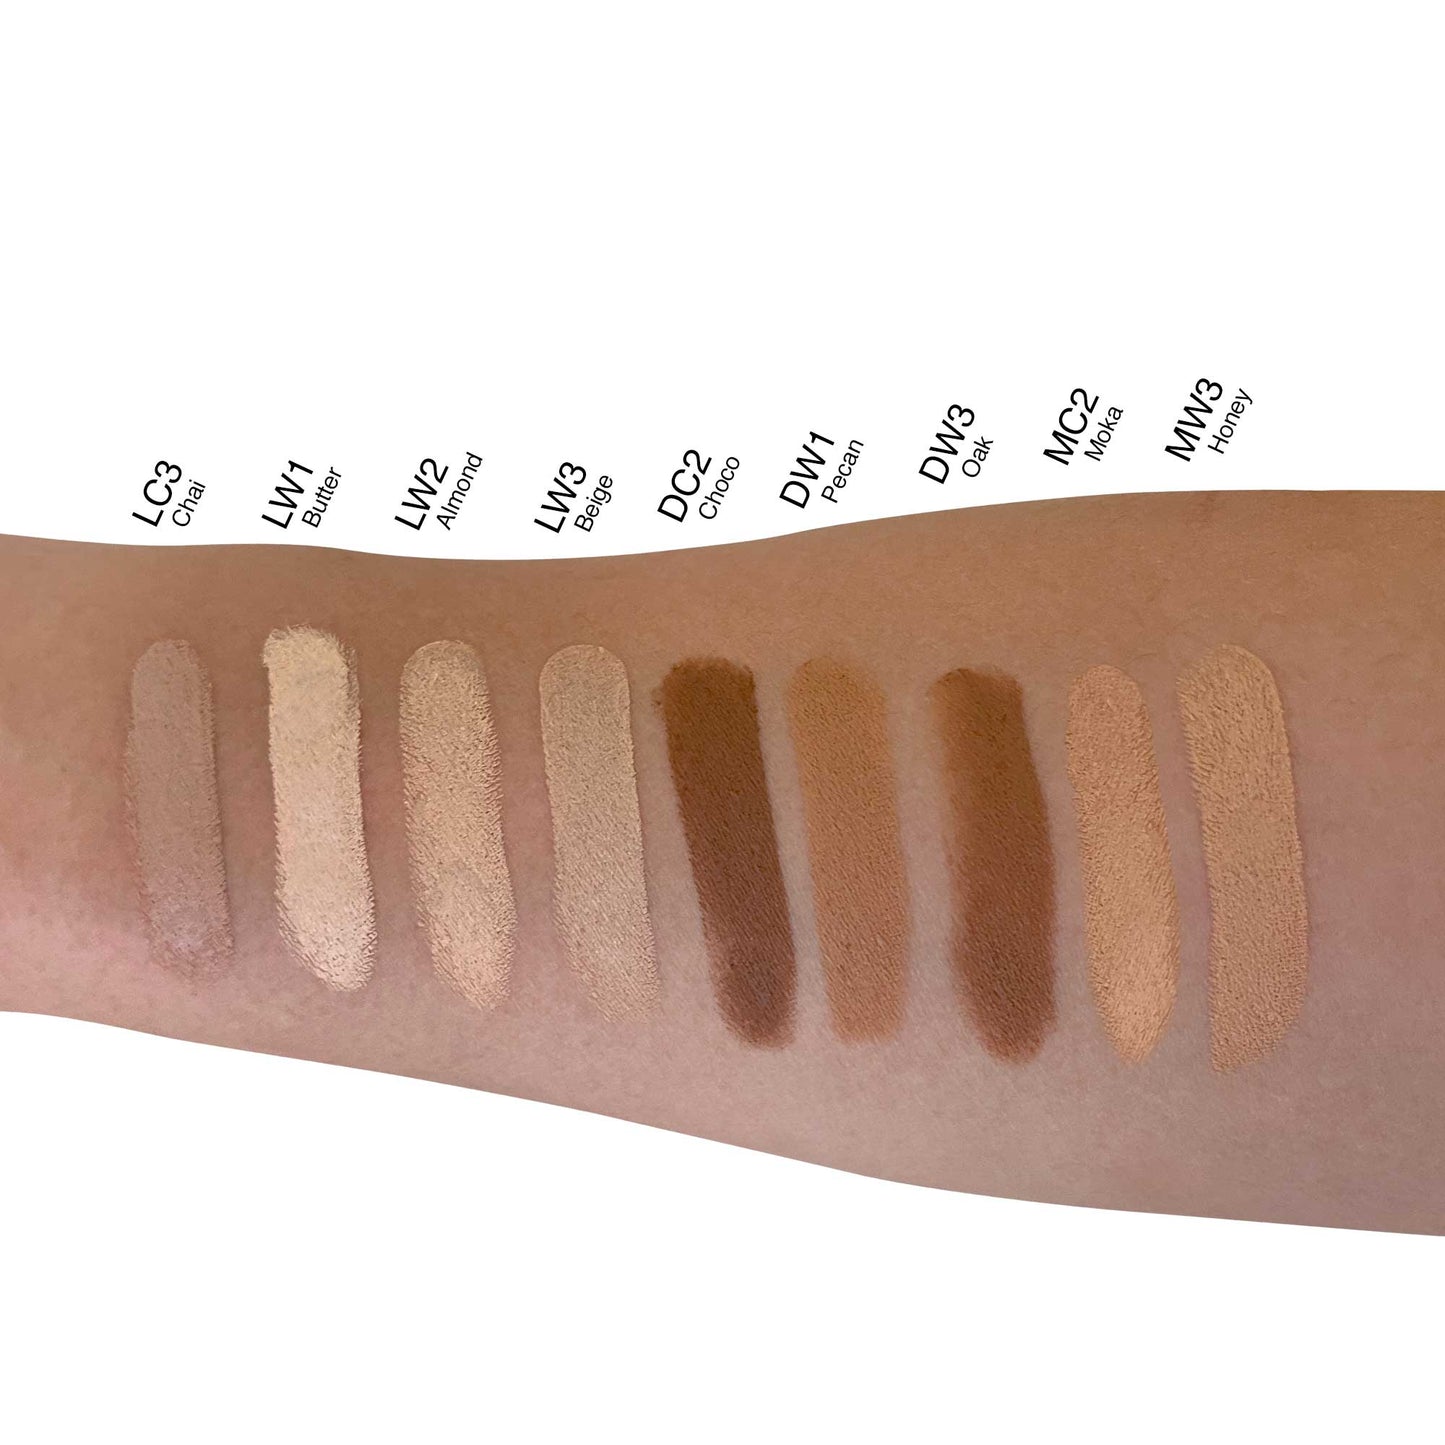 Improve your skin with Oak Creme Concealer Stick. Conceals dark spots and brightens skin, perfect for contouring or highlighting with a matte finish. Manufactured for Cruisin Organics by professional chemist, effective coverage. 9 shades to glaze.